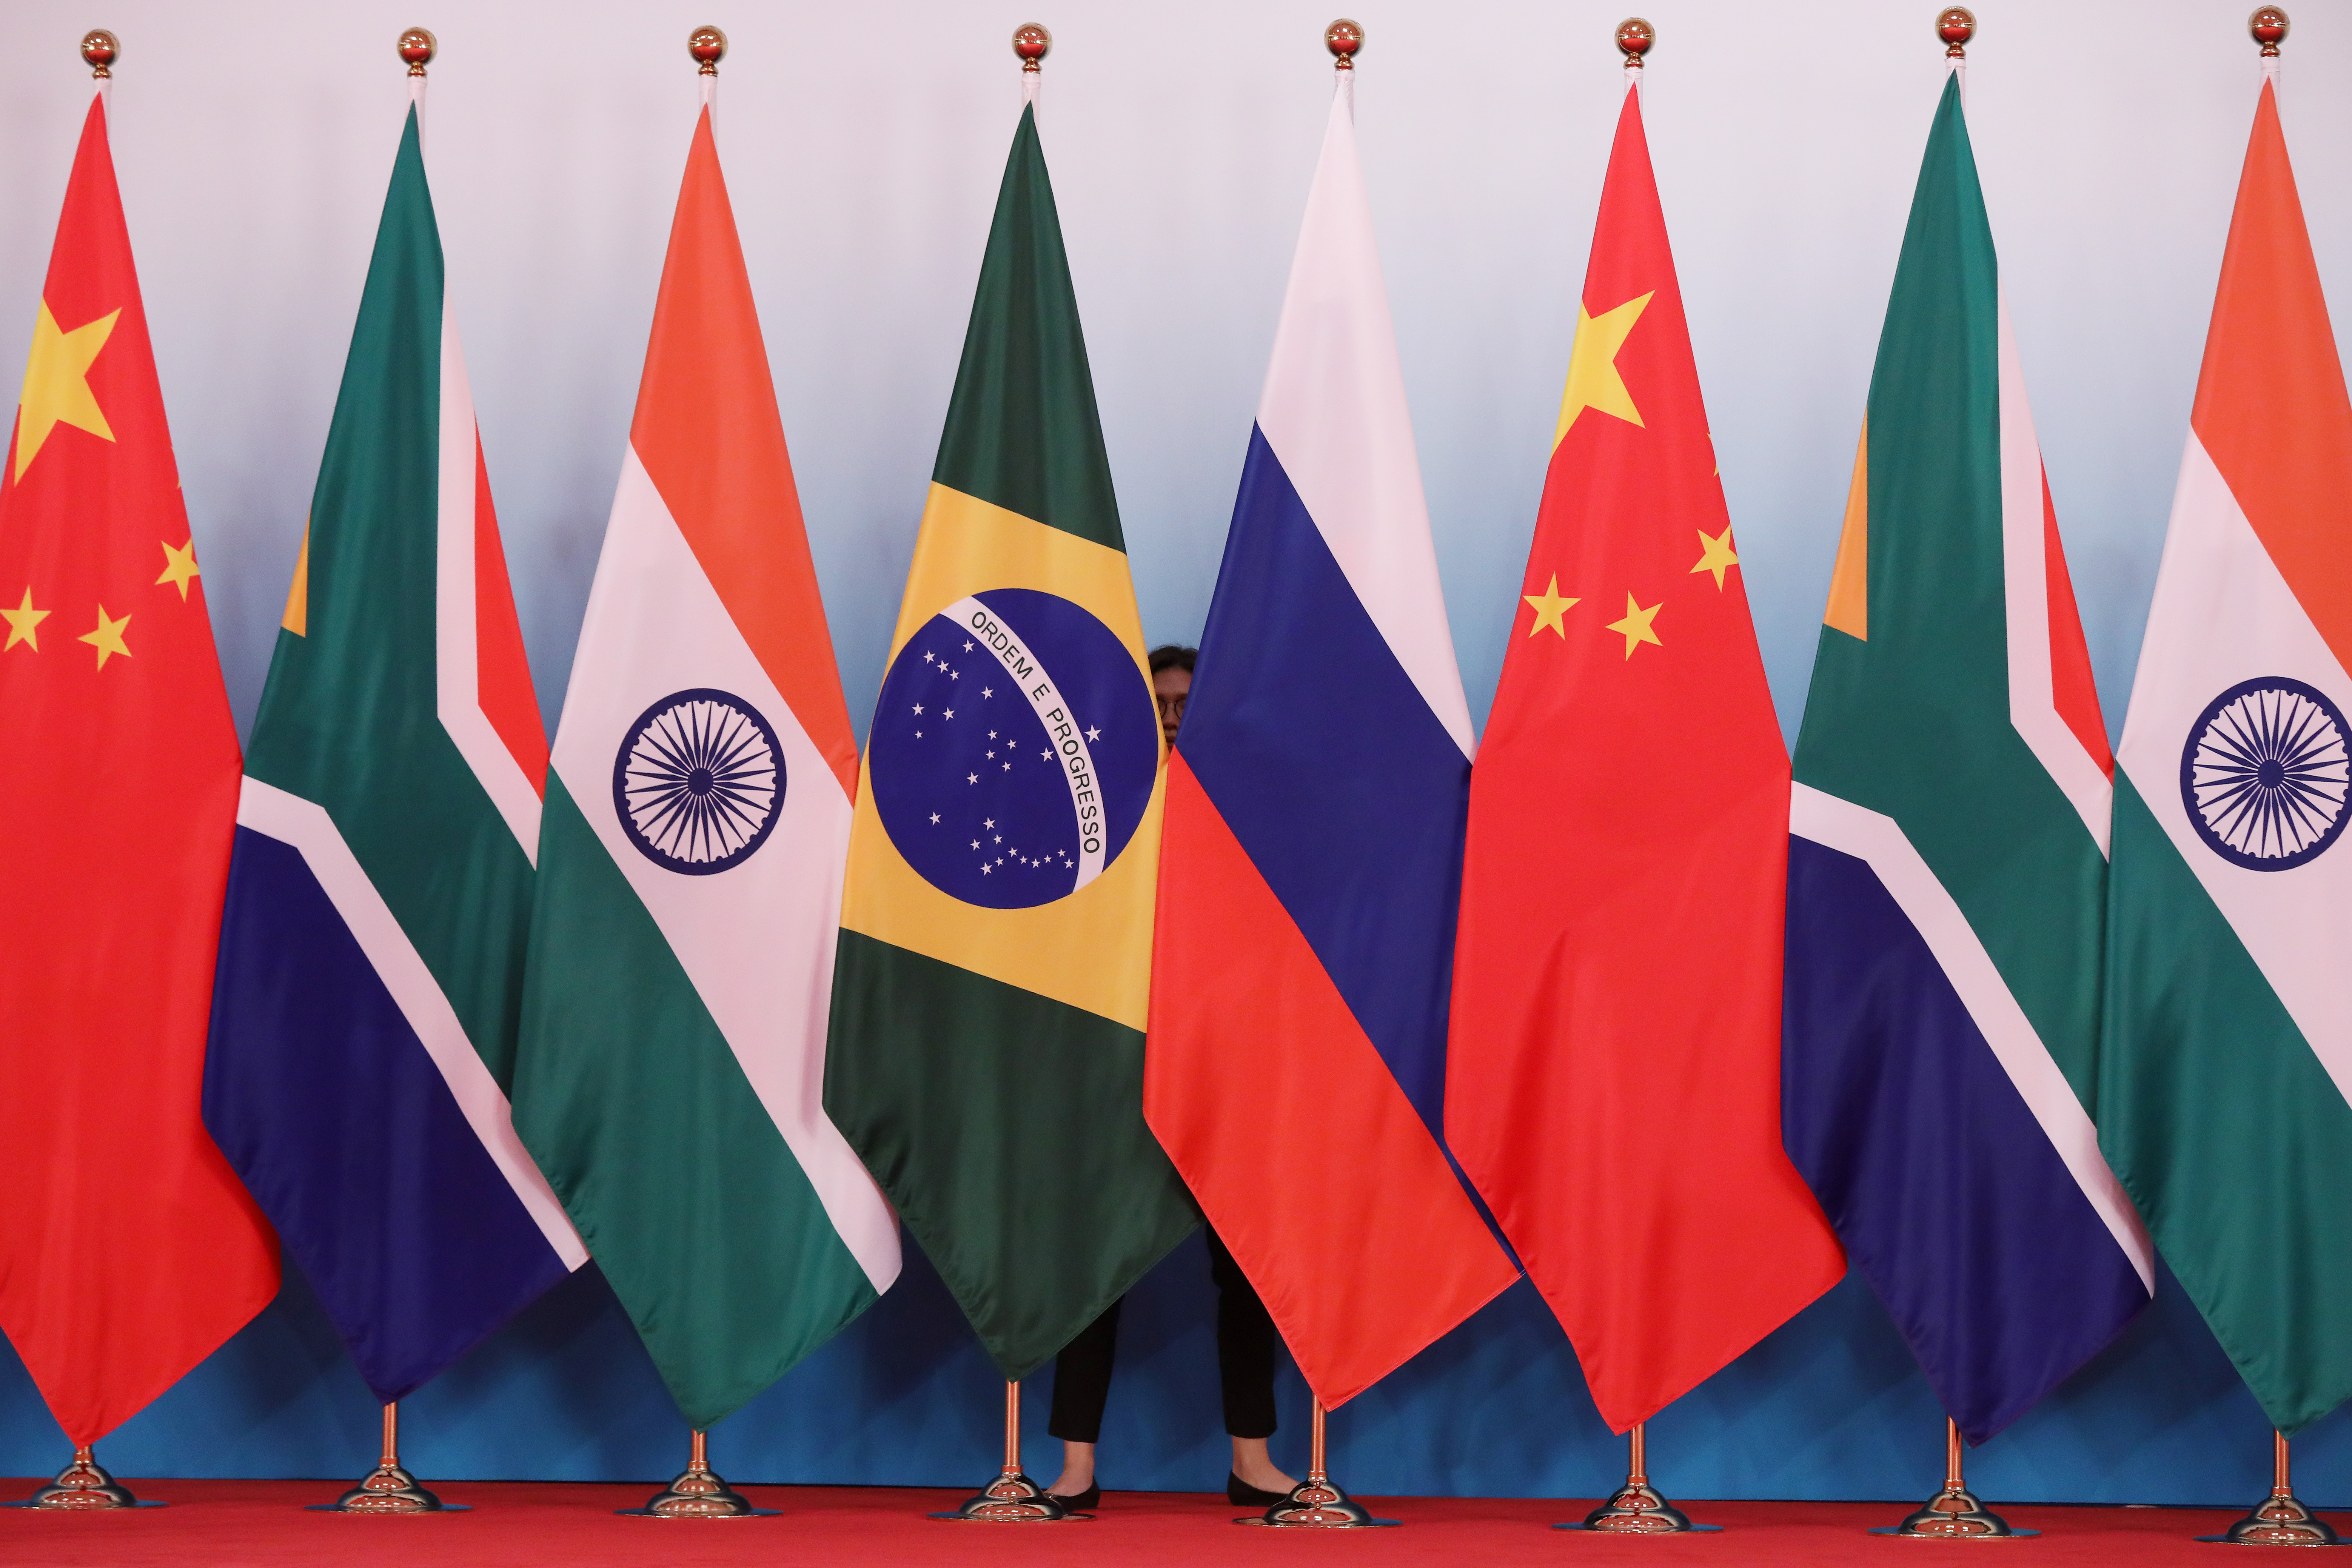 A staff worker stands behind the national flags of Brazil, Russia, China, South Africa and India to tidy the flags before a group photo during the BRICS Summit in Xiamen